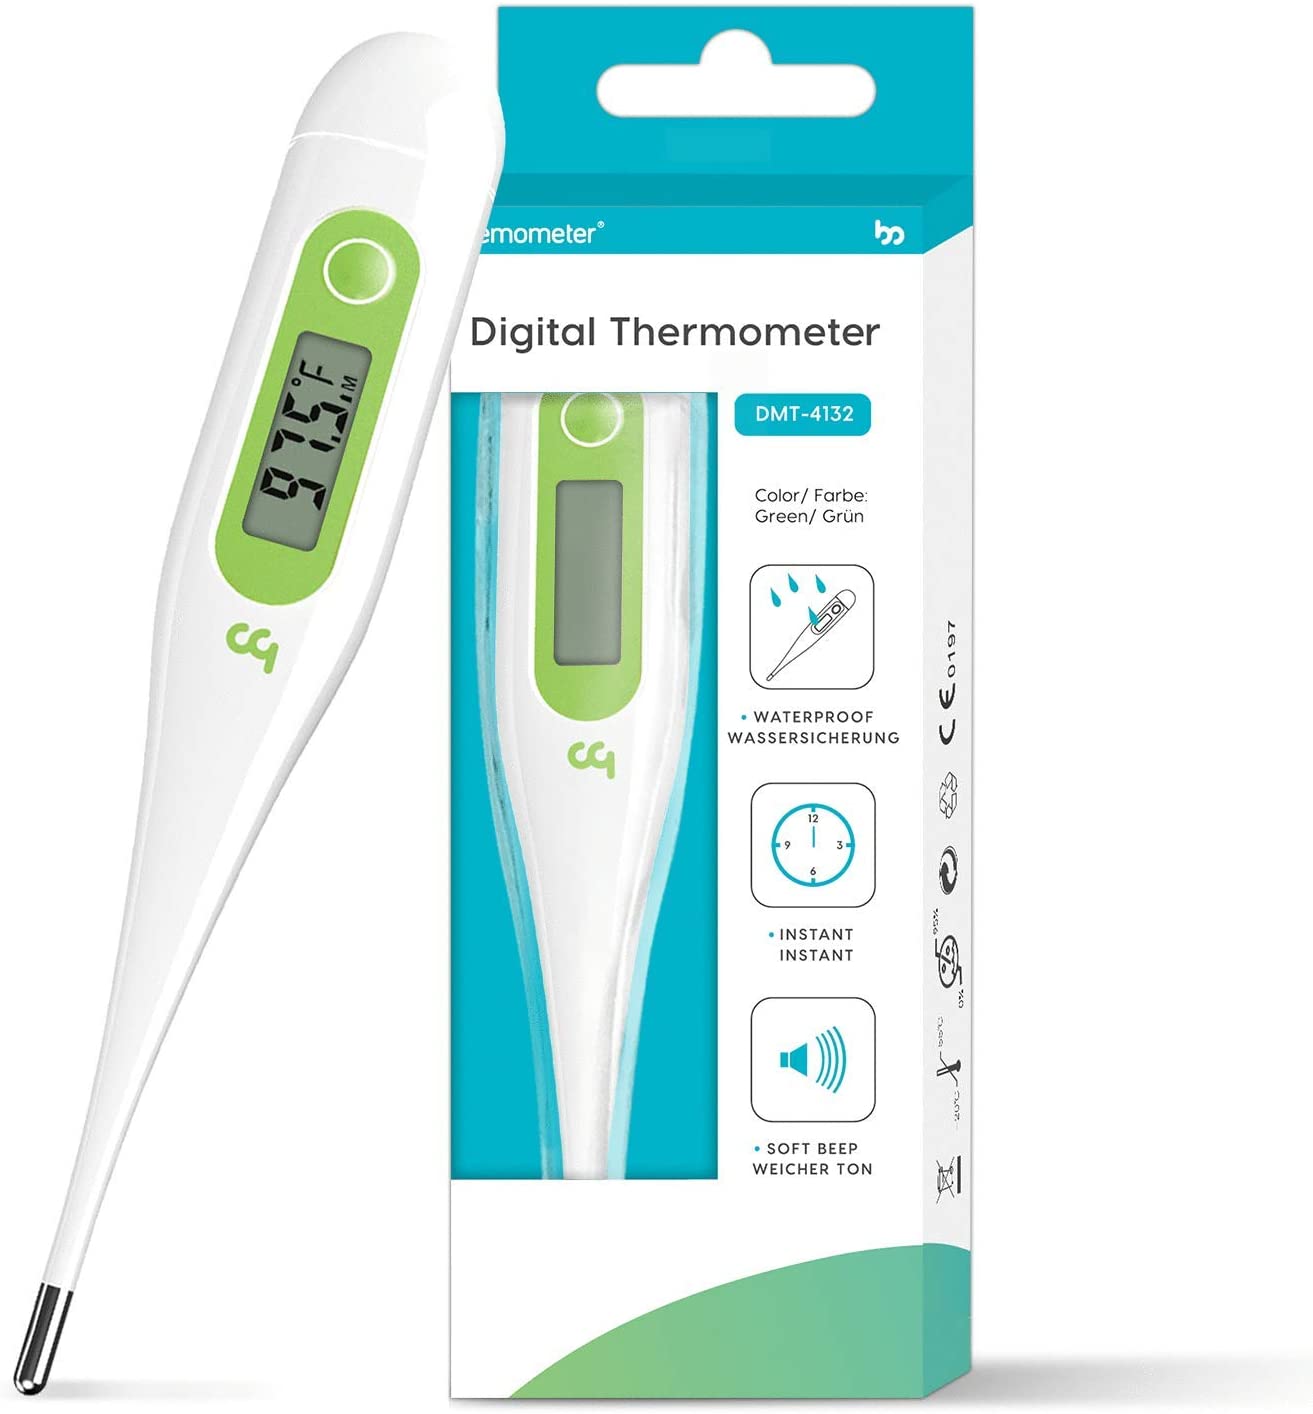 Thermometer for Adults, Oral Thermometer for Fever, Medical Thermometer with Fever Alert, Memory Recall, C/F Switchable, Rectum Armpit Reading Thermometer for Baby Kids and Adults[2020 New Model]